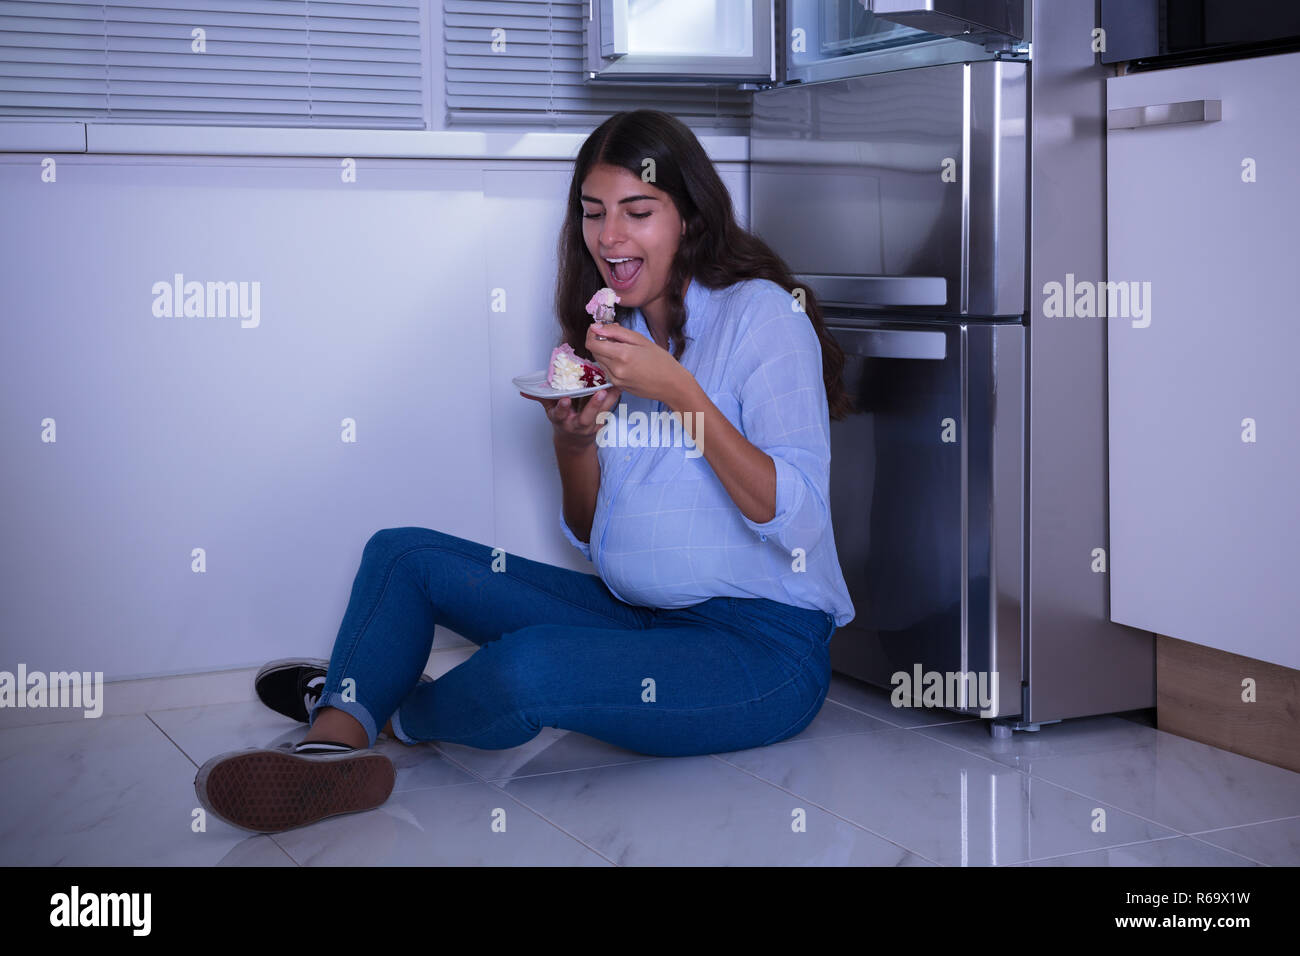 Young Woman Eating Slice Of Cake Stock Photo